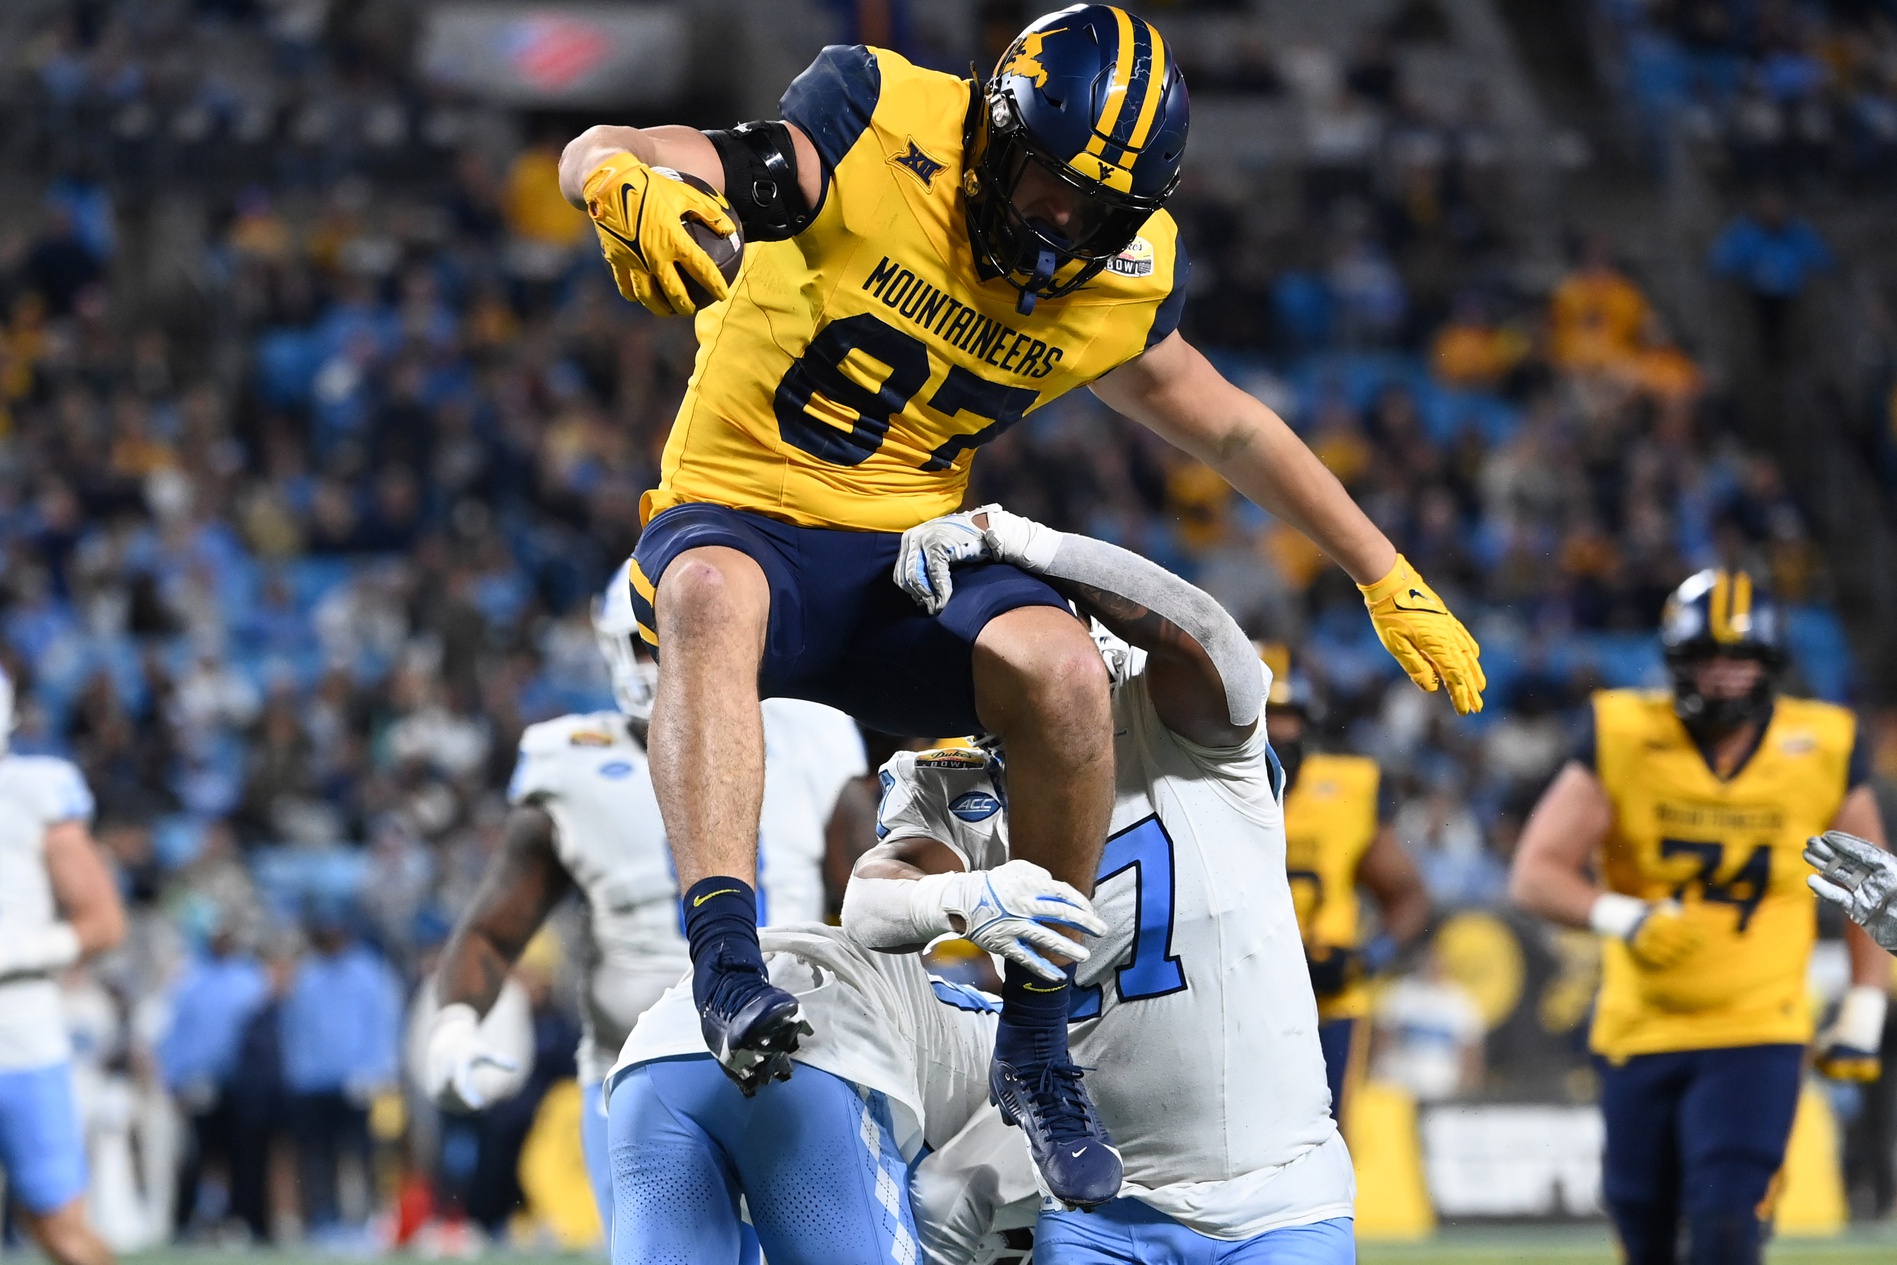 We round out the offensive side of our West Virginia Spring position preview series by focusing on the WVU tight ends looking for depth.